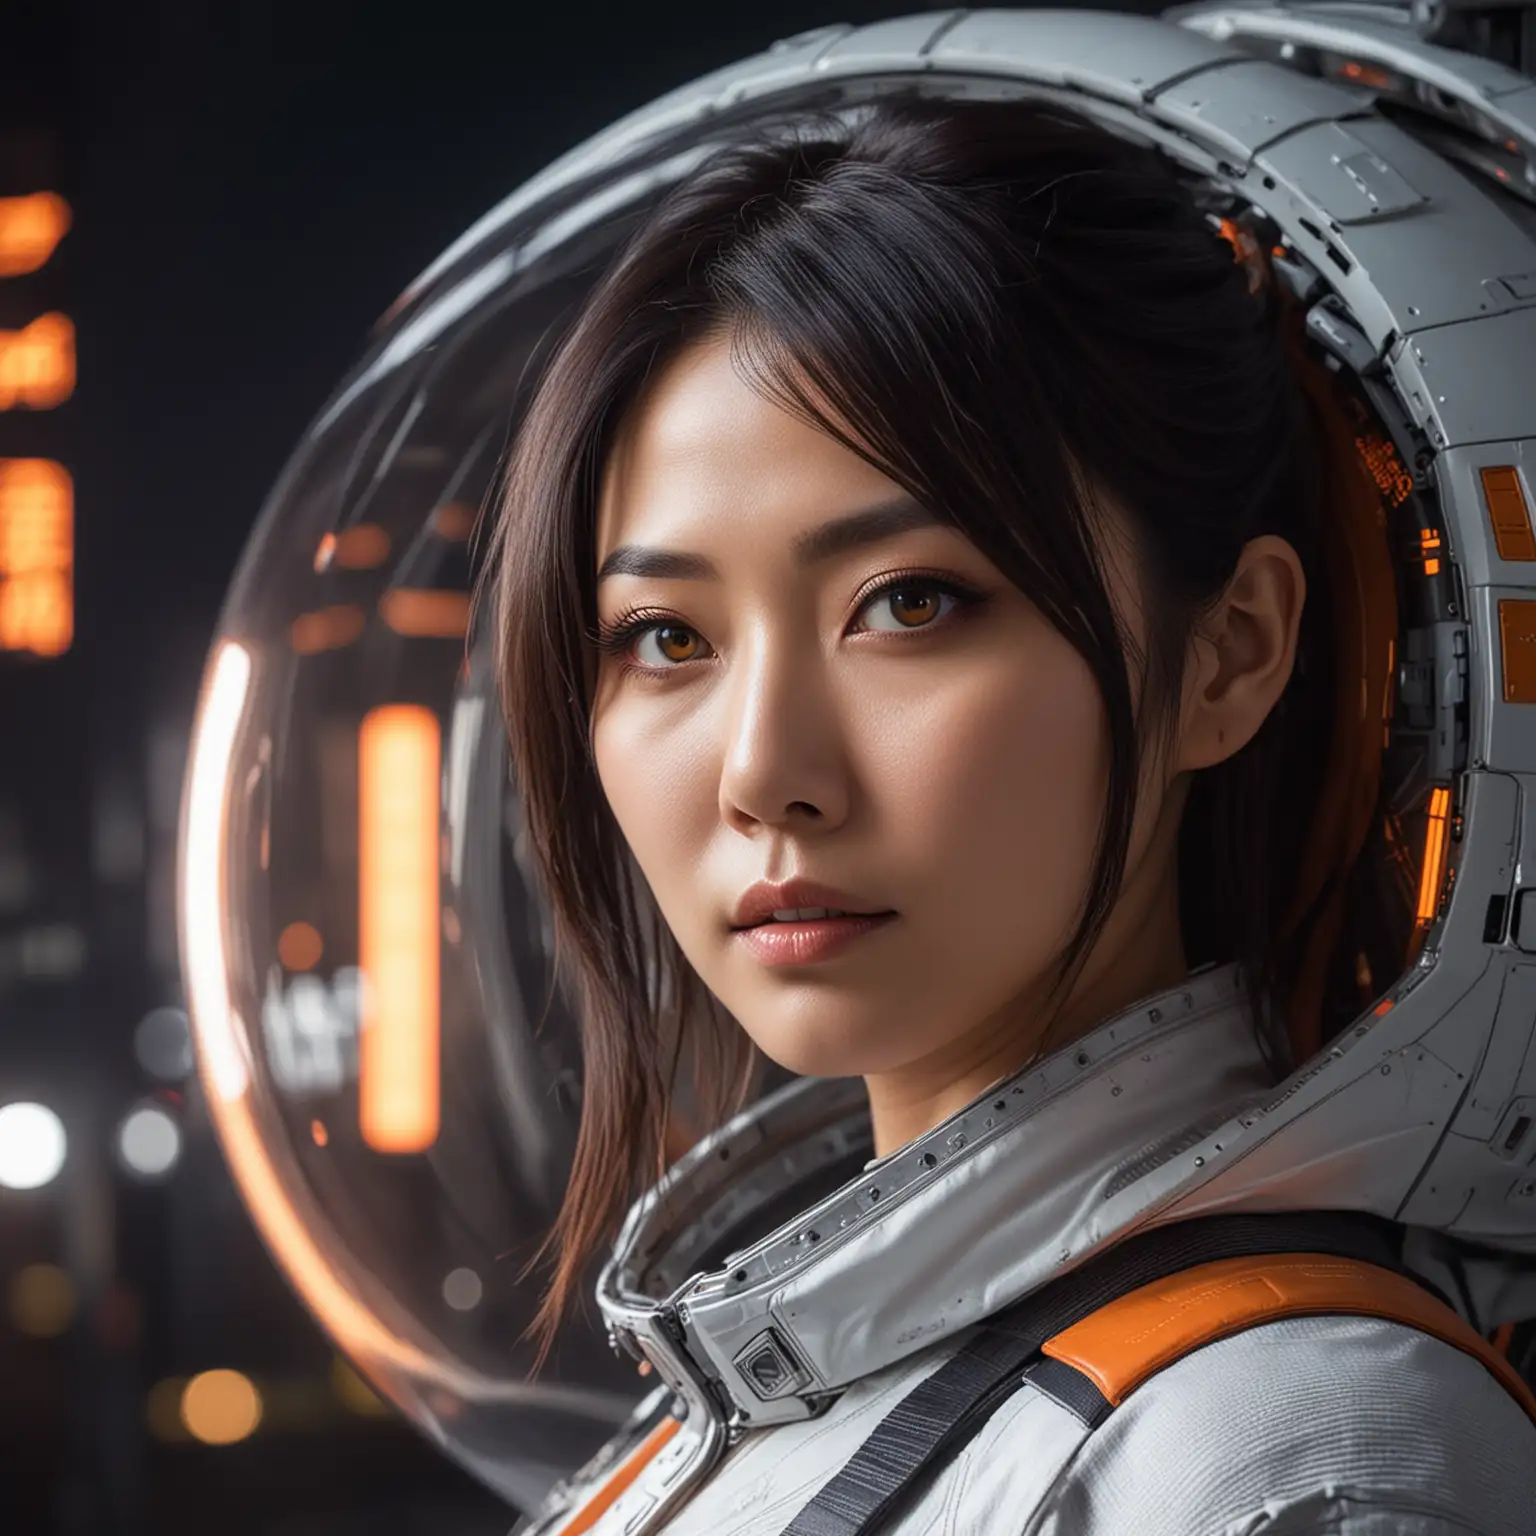 Futuristic Japanese Style Woman in Spaceship Over Dark City